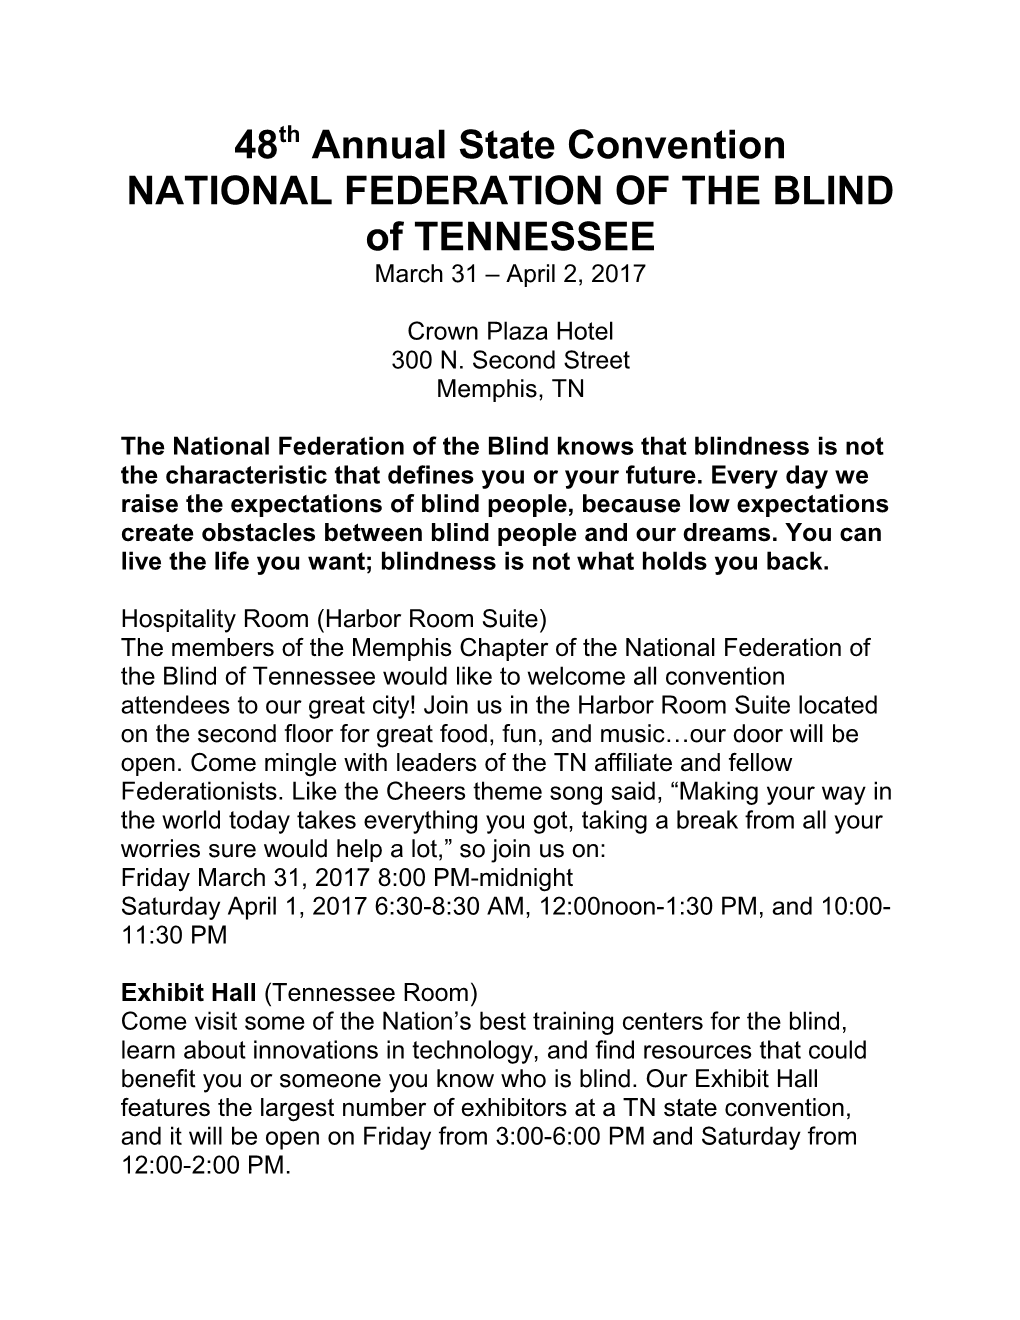 NATIONAL FEDERATION of the BLIND of TENNESSEE